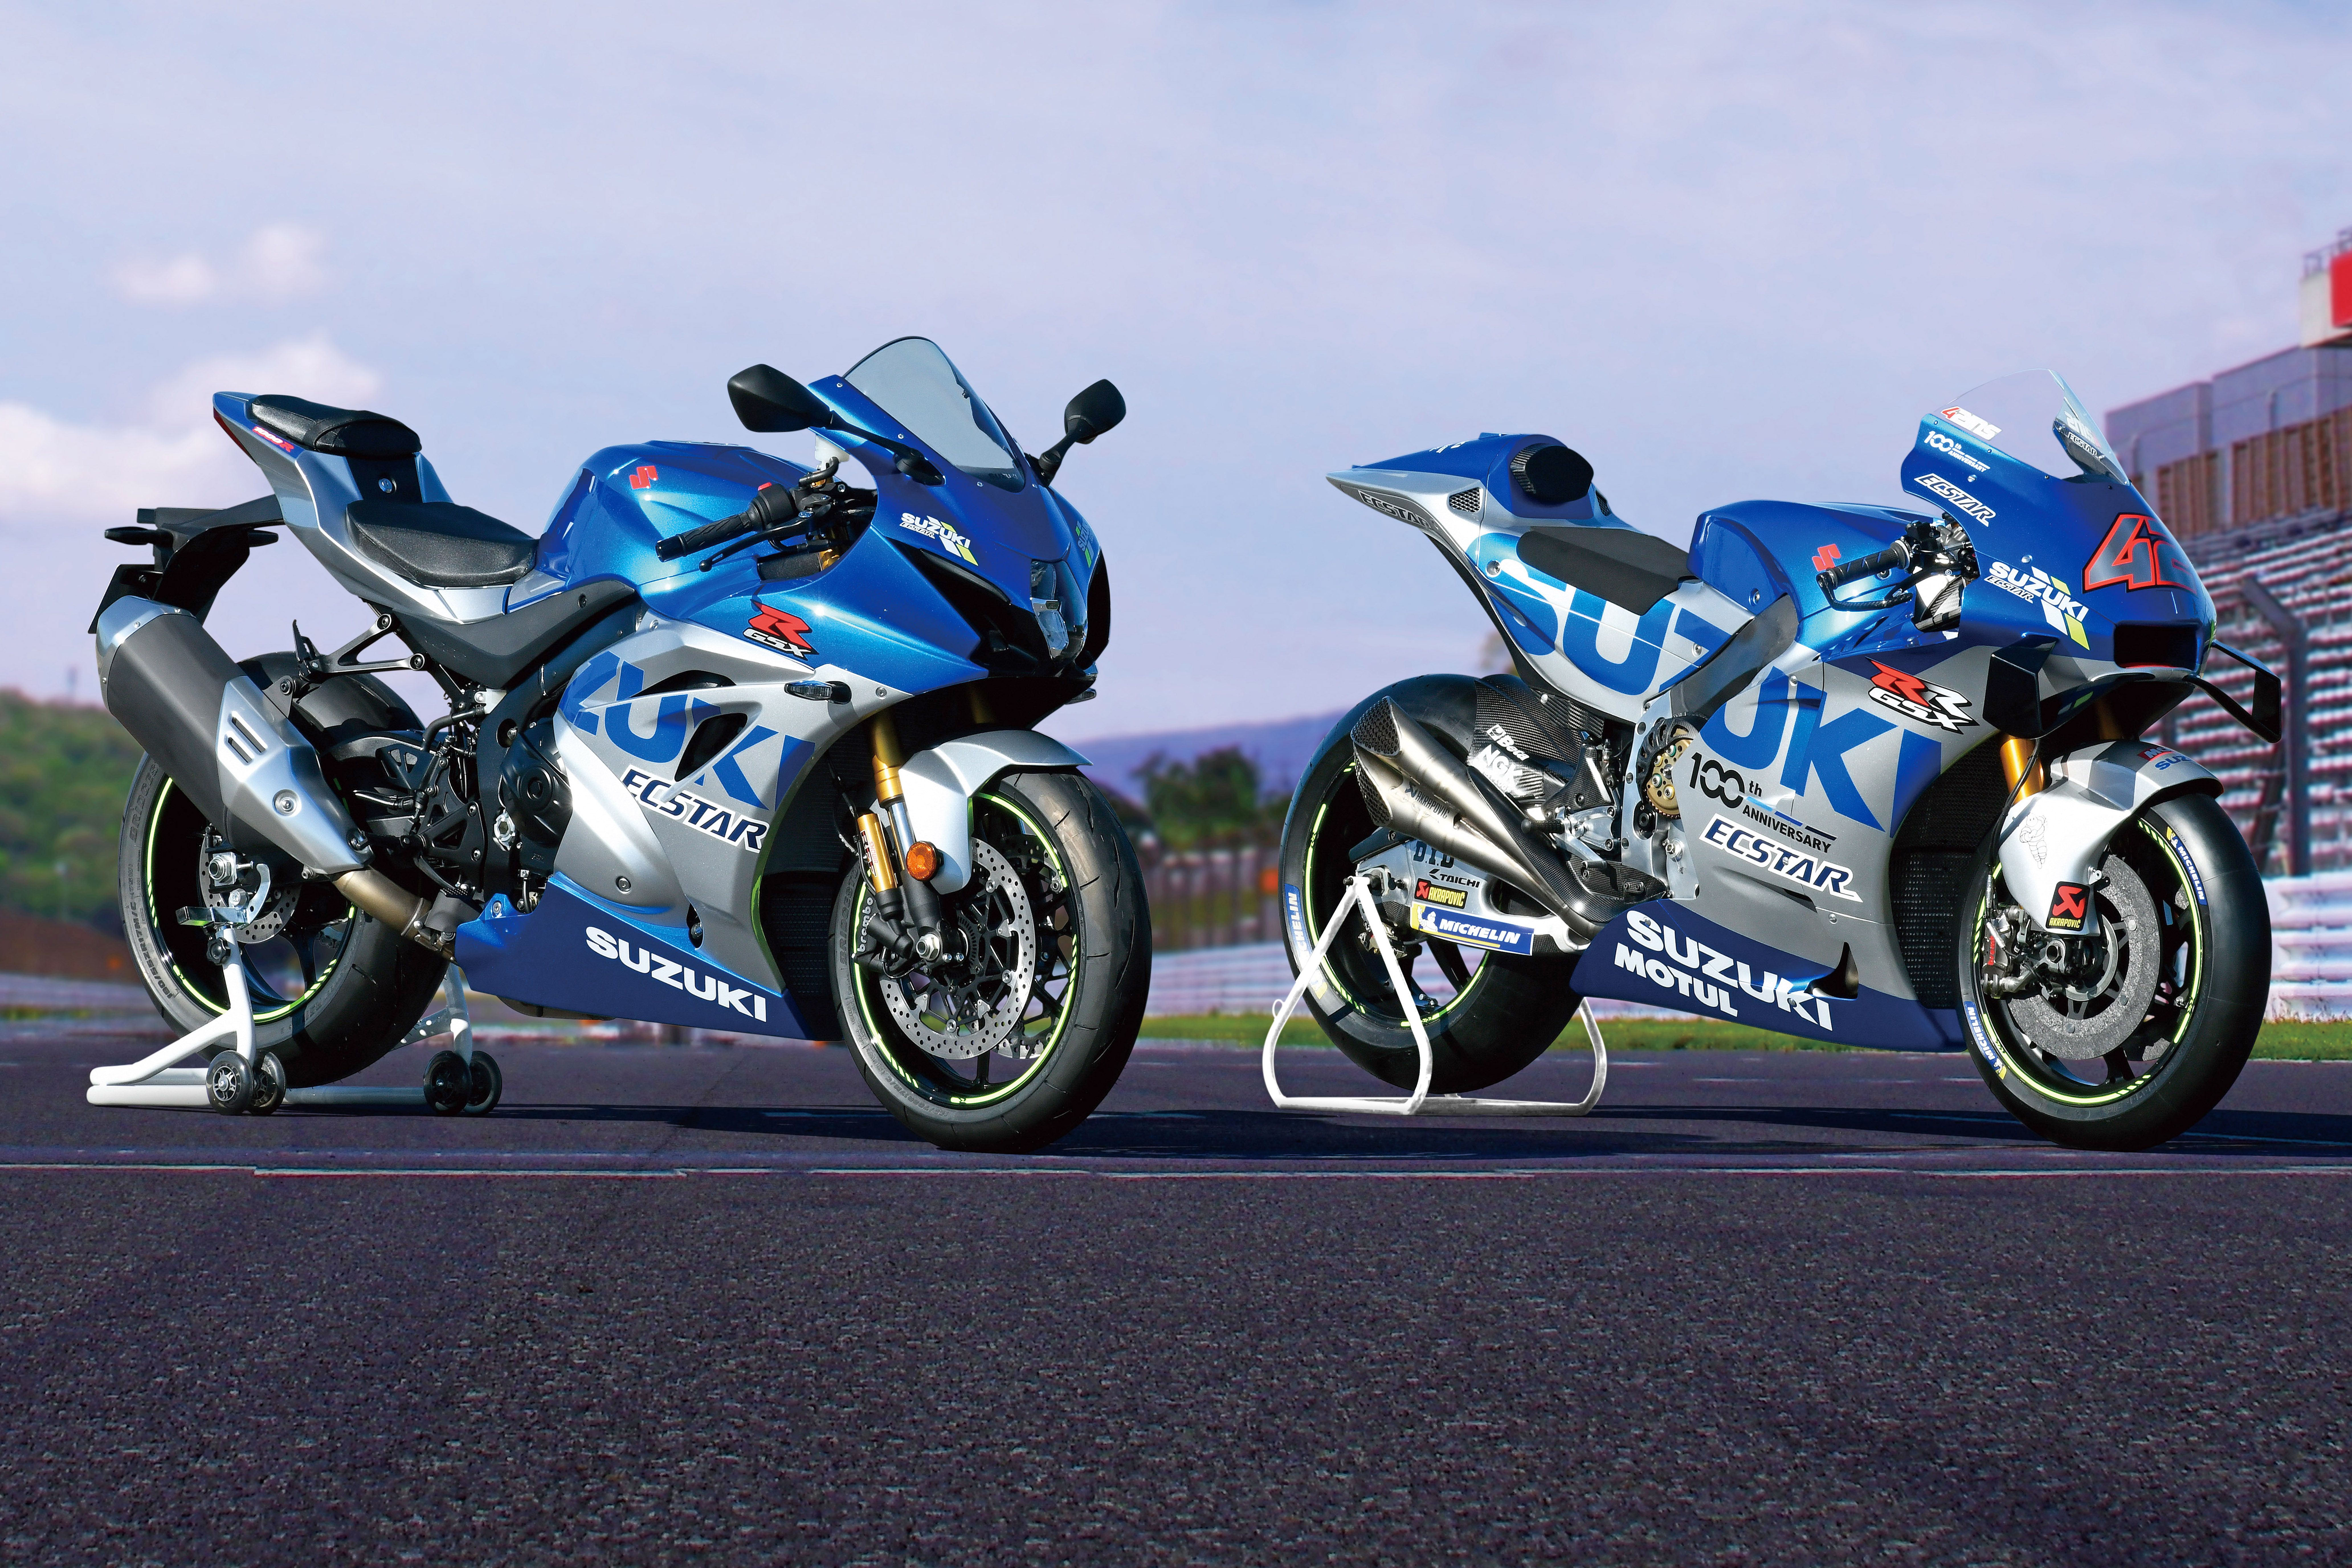 10 Reasons Why The 2022 Suzuki GSX-R1000 Is Still The King of Sports Bikes